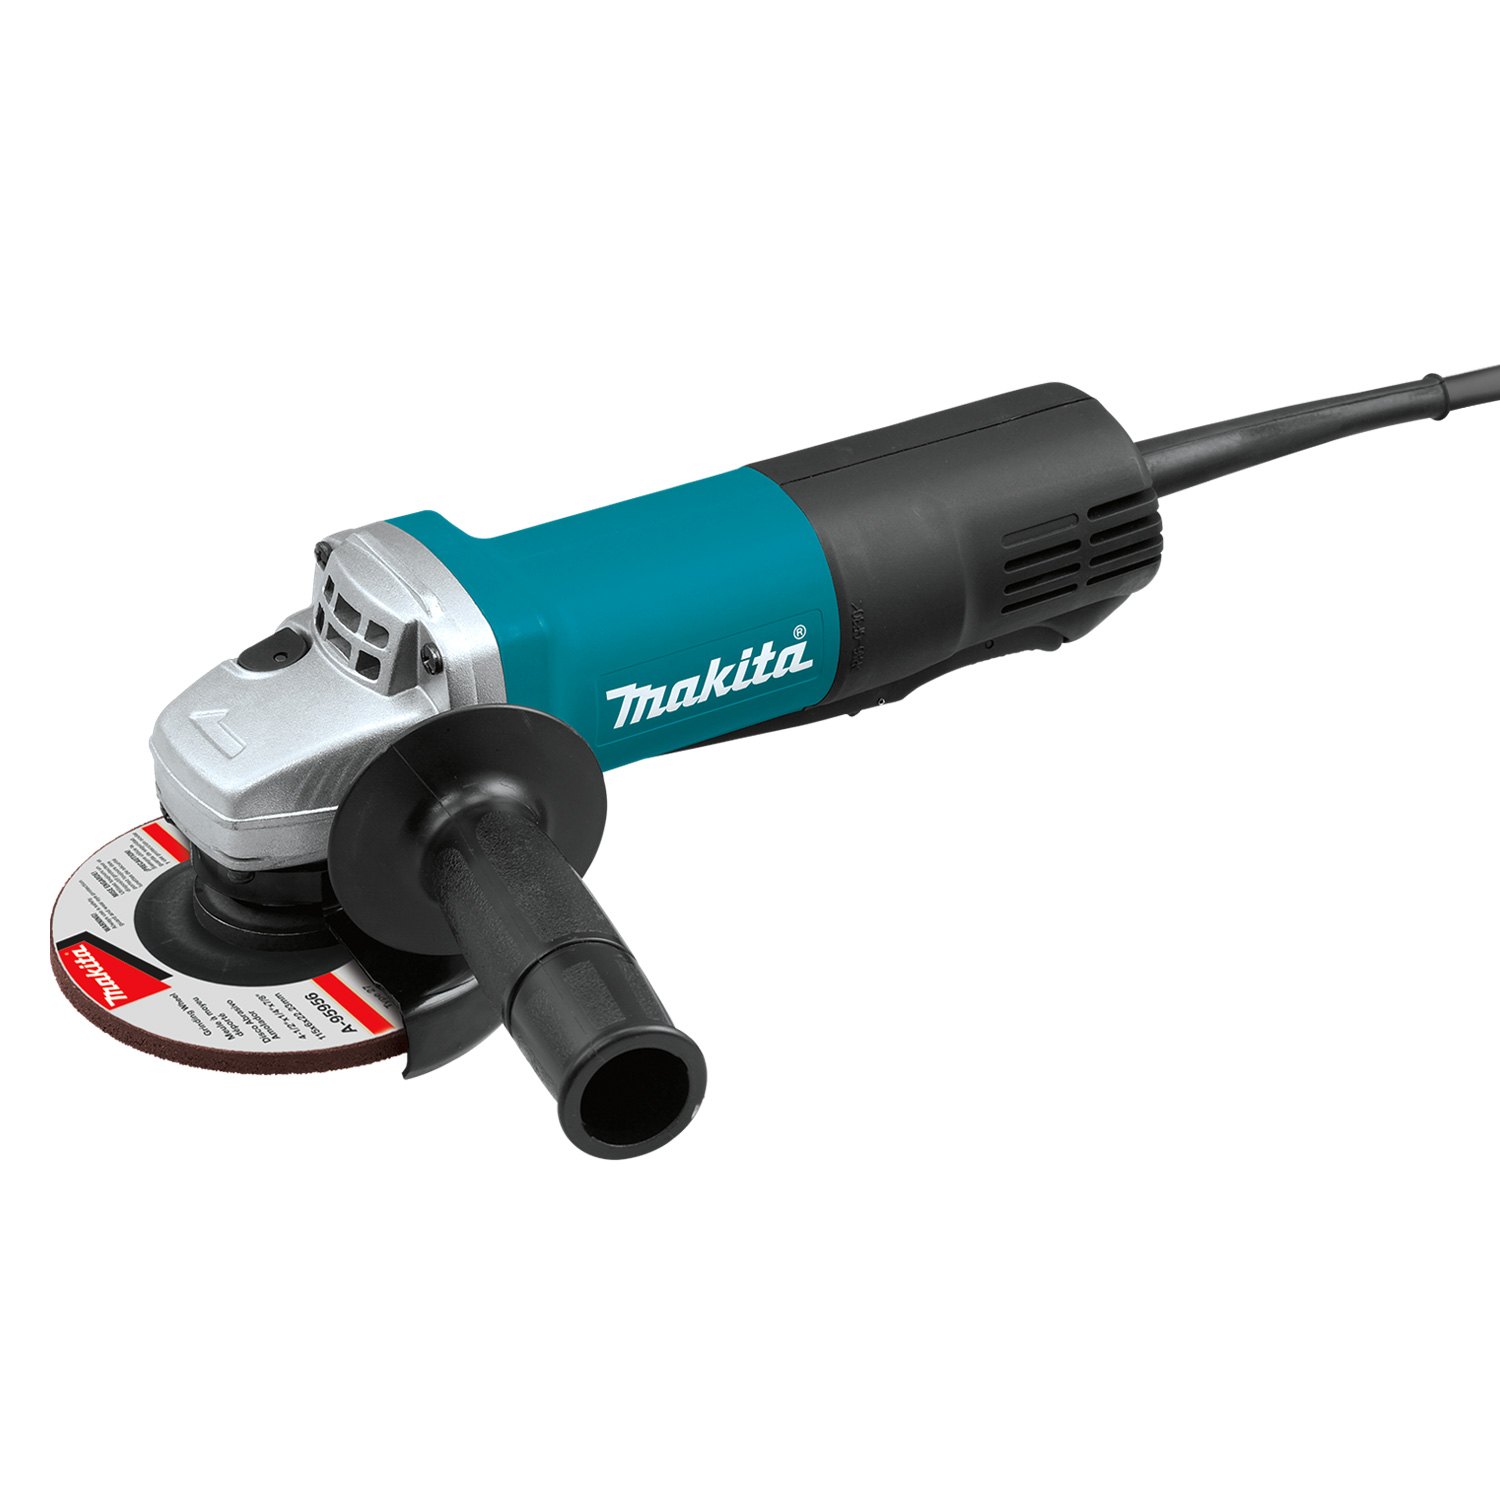 Makita 9557PBX1 4-1/2" 120V 7.5A Corded Angle Grinder w/Paddle Switch & Case - image 5 of 5